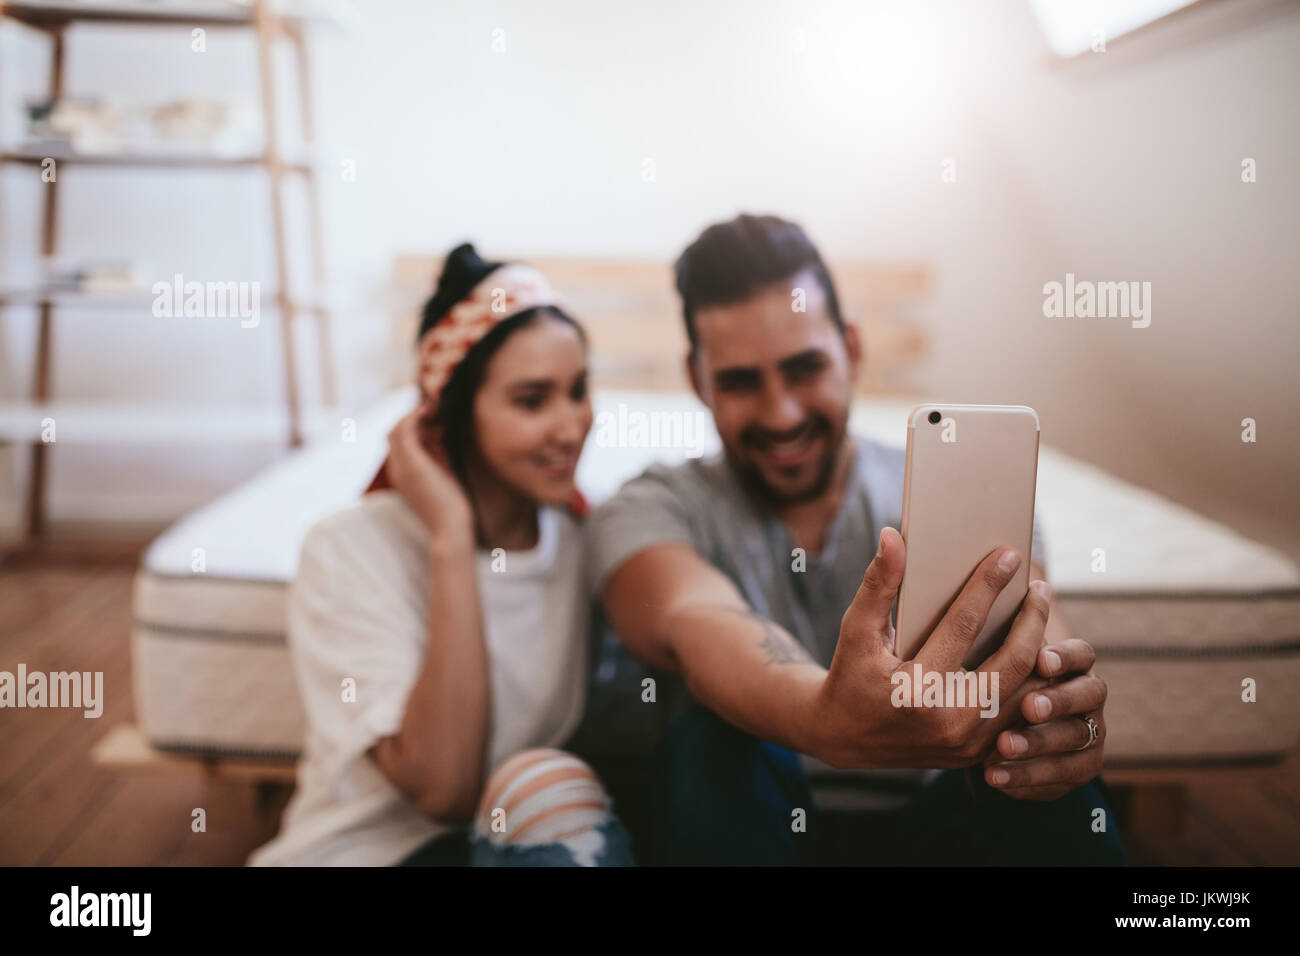 Shot of young couple sitting at home and taking selfie with mobile phone. Focus on smart phone in hands of a man. Stock Photo